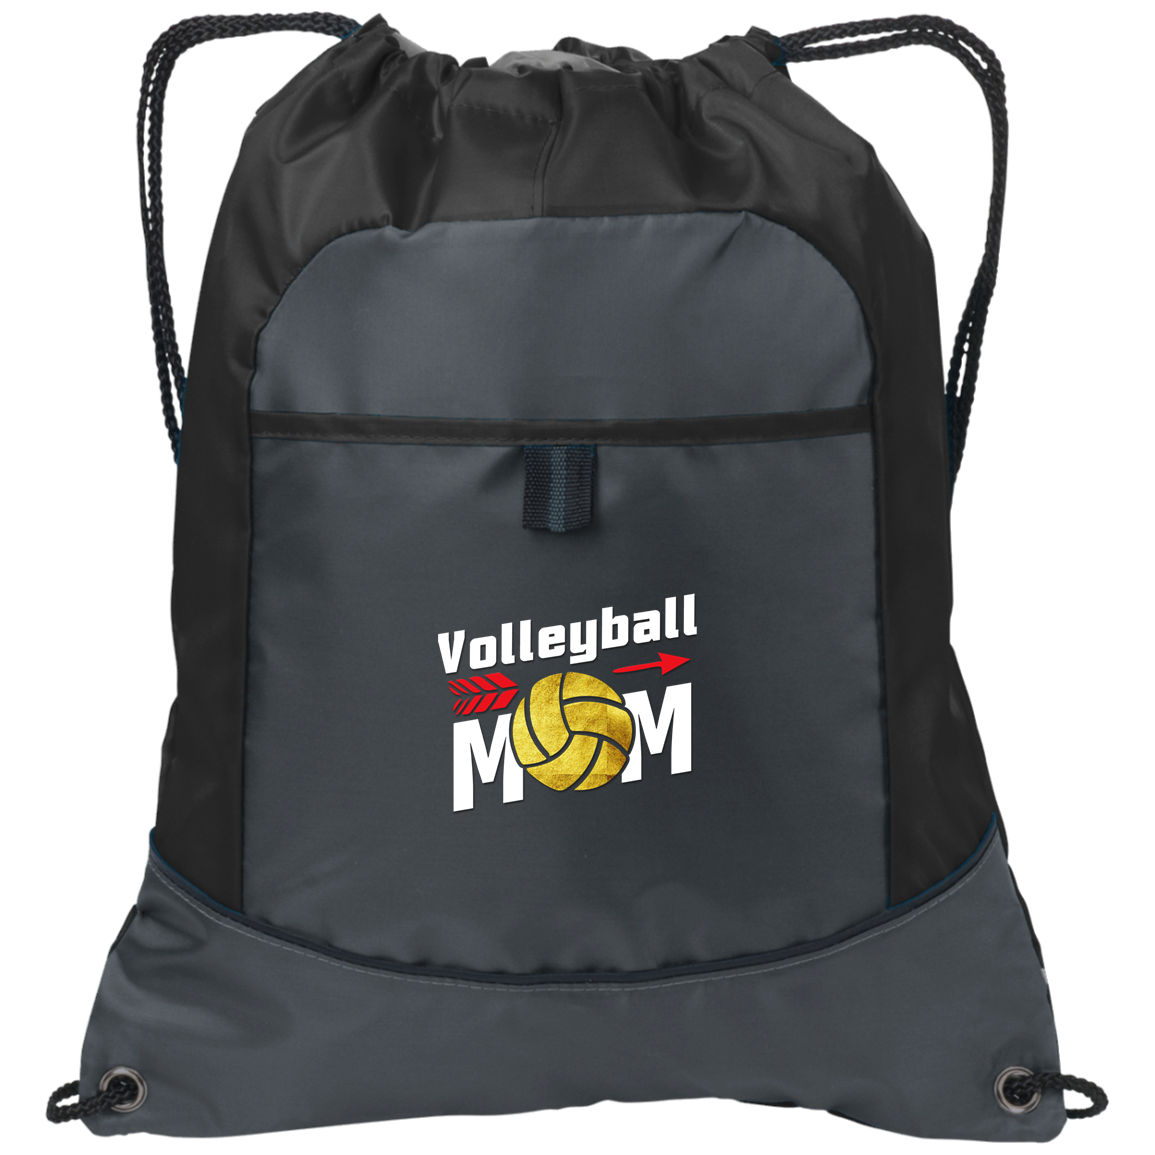 Volleyball Mom Casual Drawstring Bags